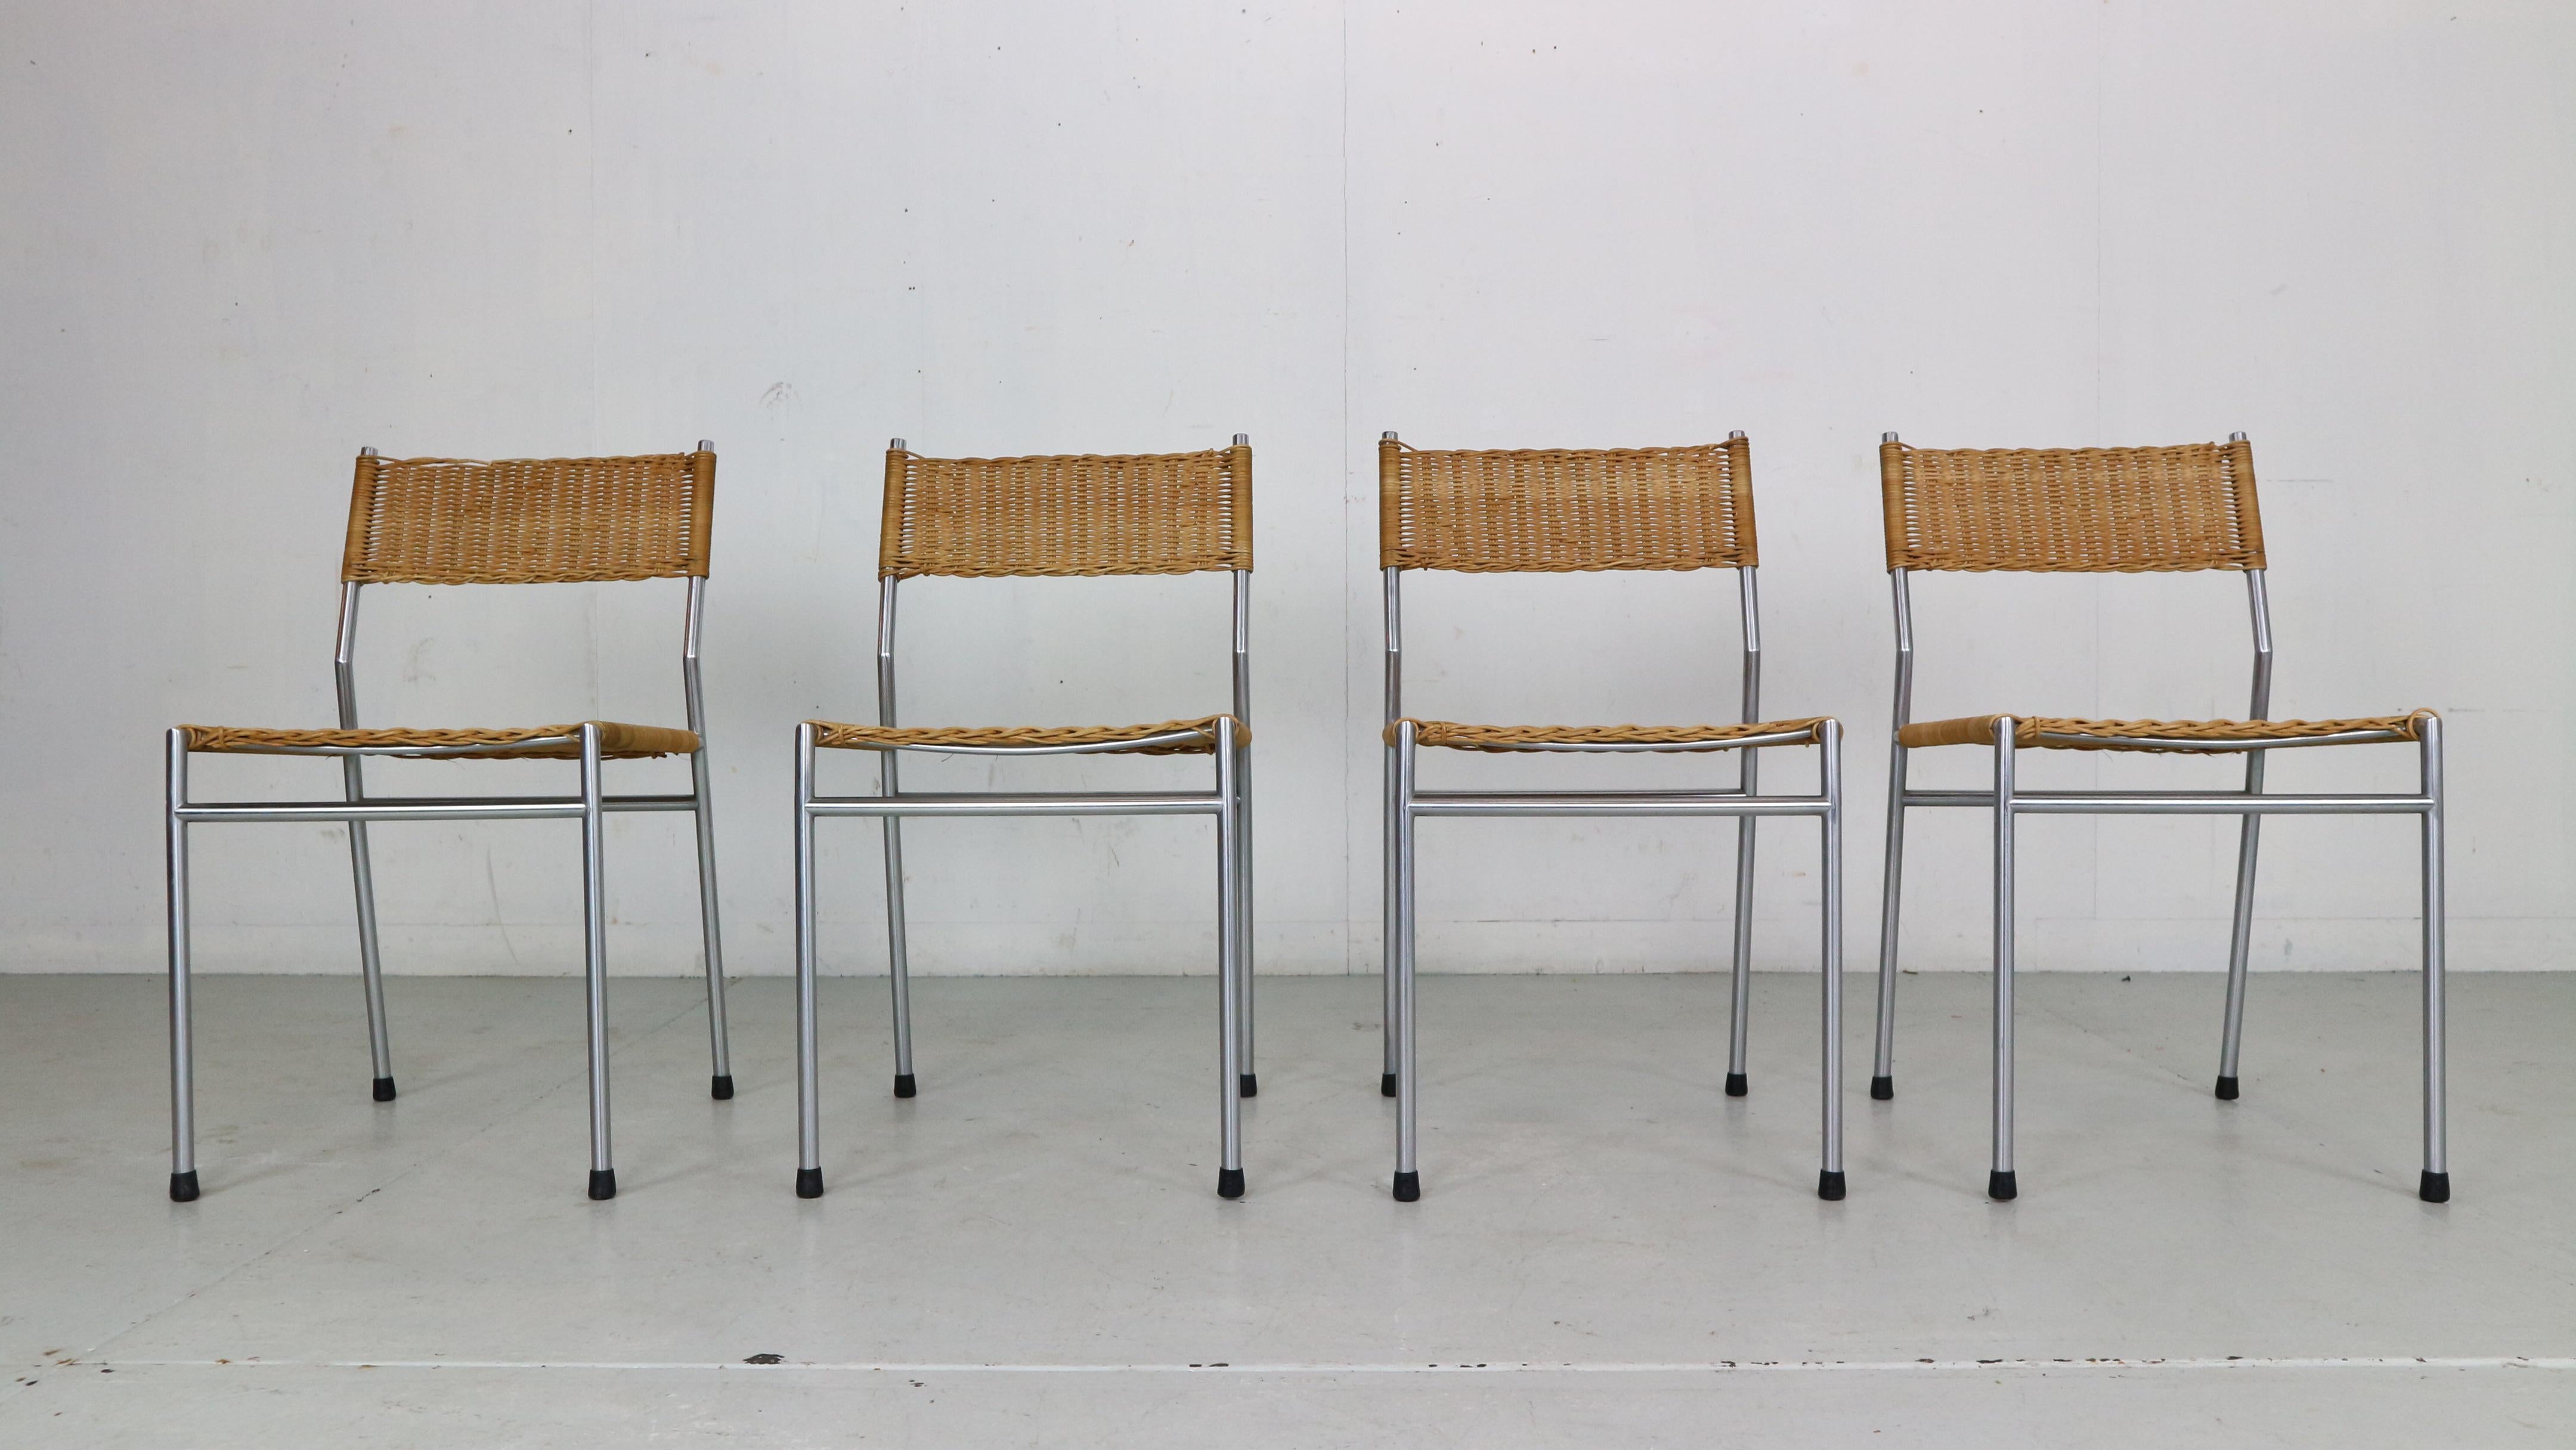 Mid-Century Modern period set of four dinning room chairs designed by Martin Visser for 't Spectrum Bergeijk manufacture in 1960's period, Netherlands.

These early versions of the SE05 chairs have a stainless steel tubular metal frame and whicker